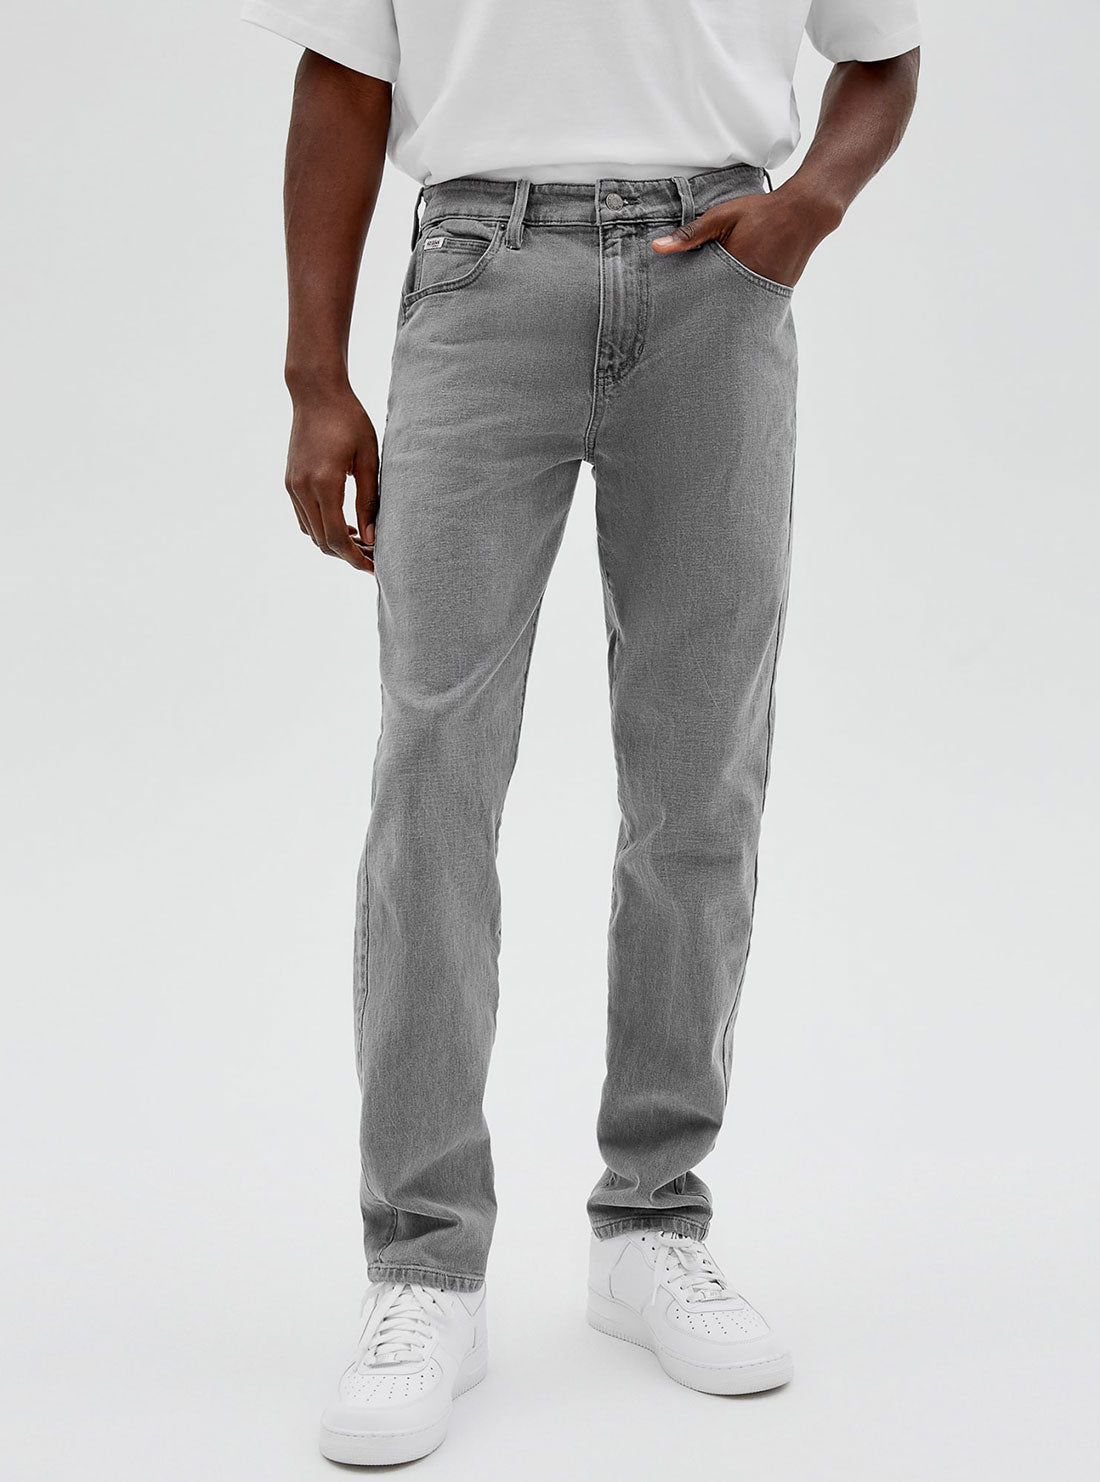 GUESS Mens Guess Originals Slim Straight Leg Jeans in Grey Pearl Wash M2GG33D4DA5 Front View